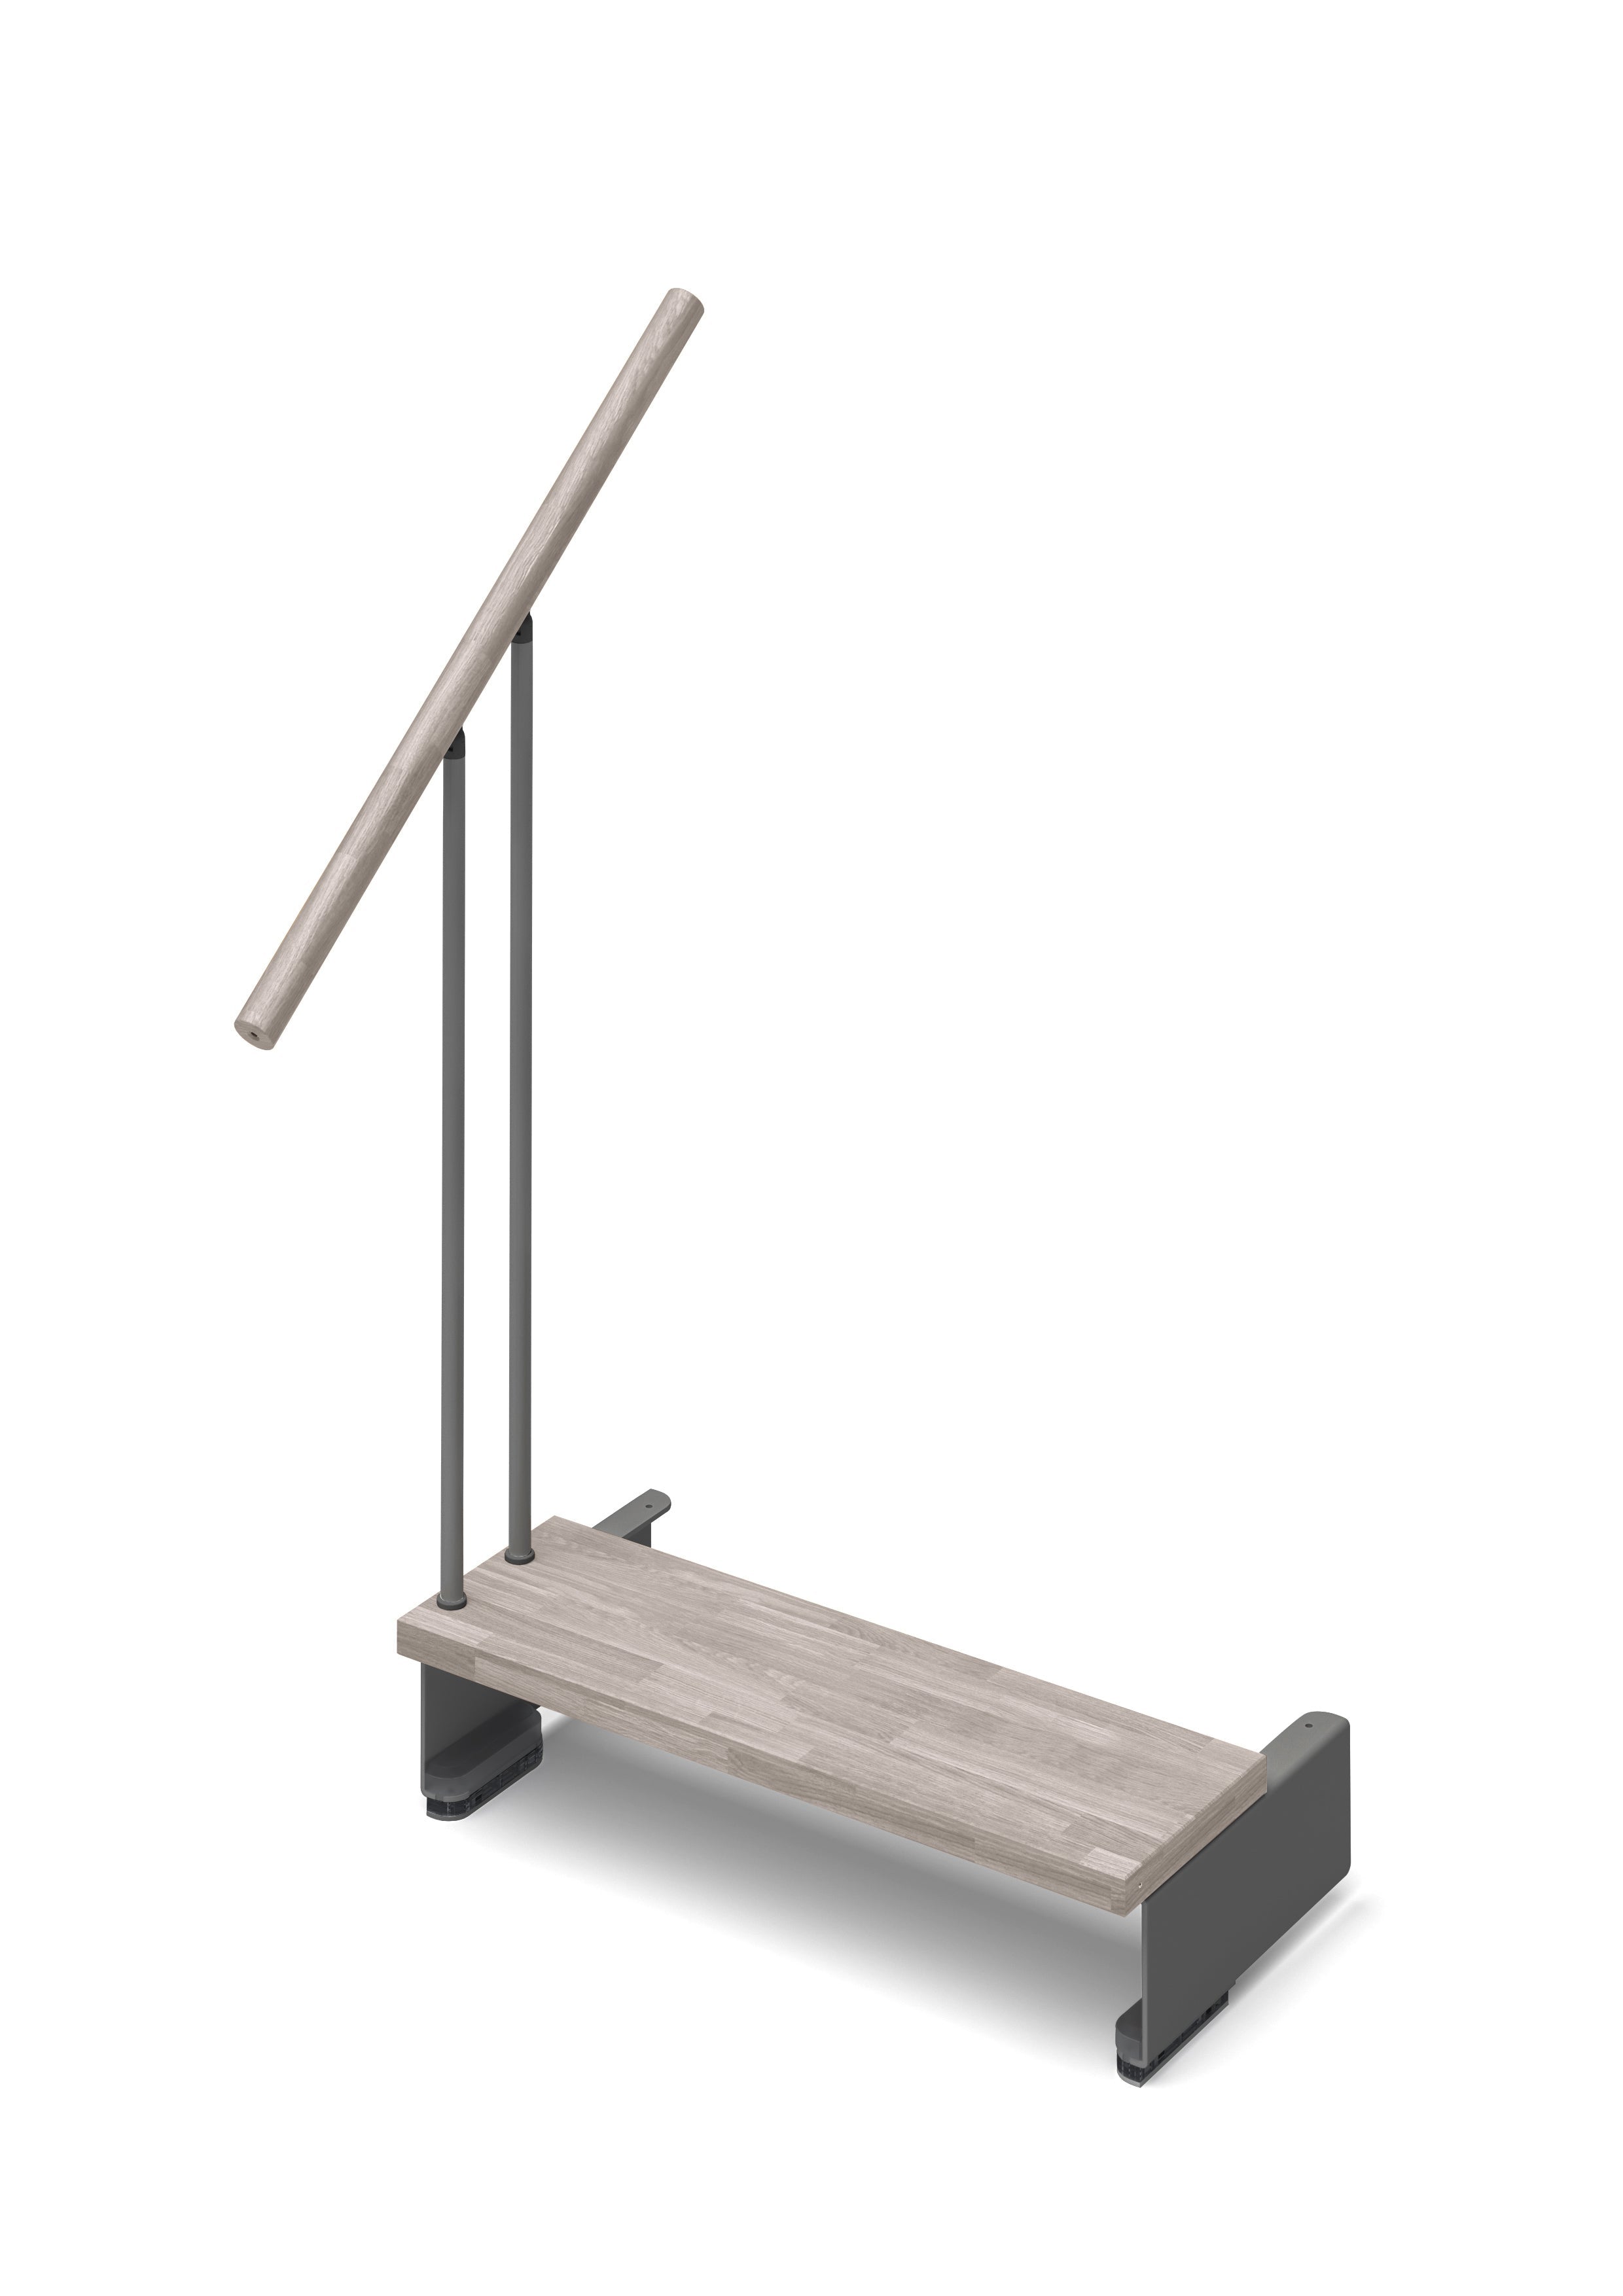 Additional step Adapta 94cm (with structure and railing) - Taupe 87